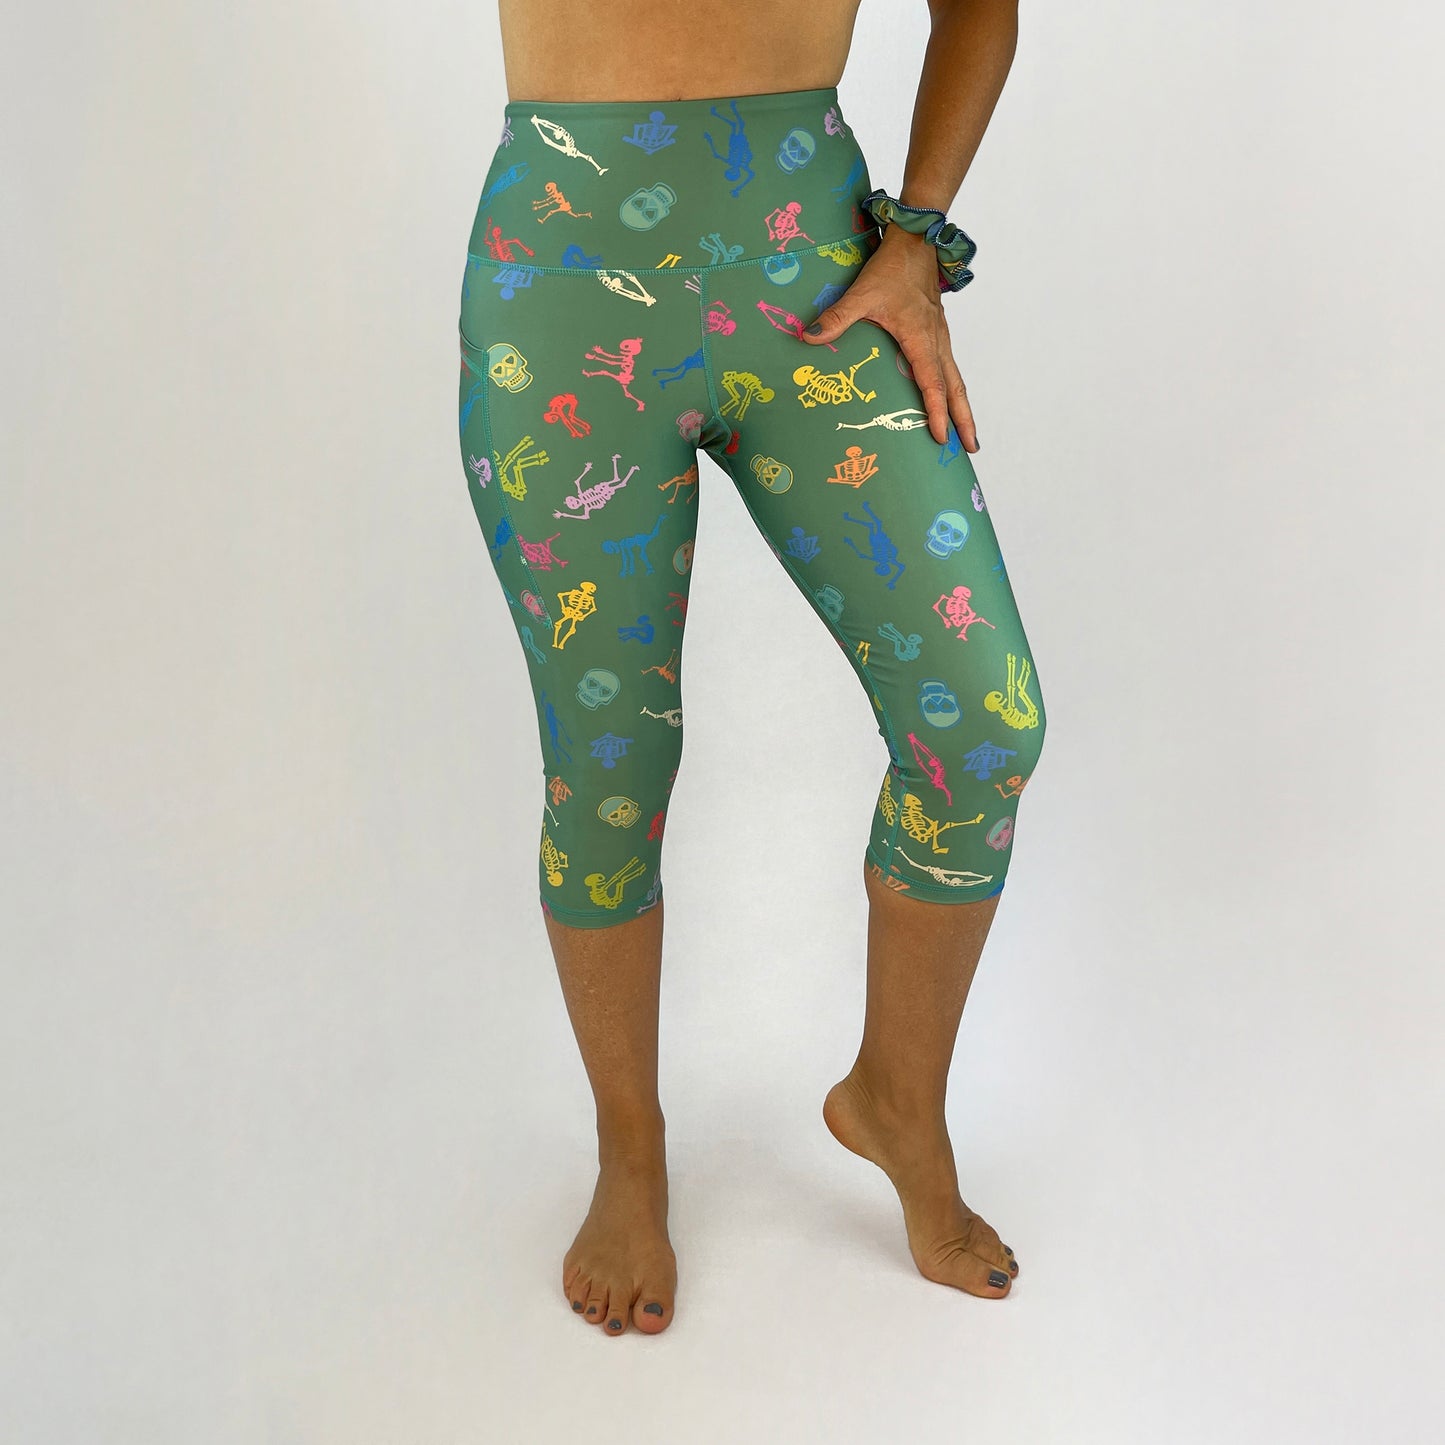 colourful high rise leggings with pockets made sustainably from recycled materials - skeletons and skulls front